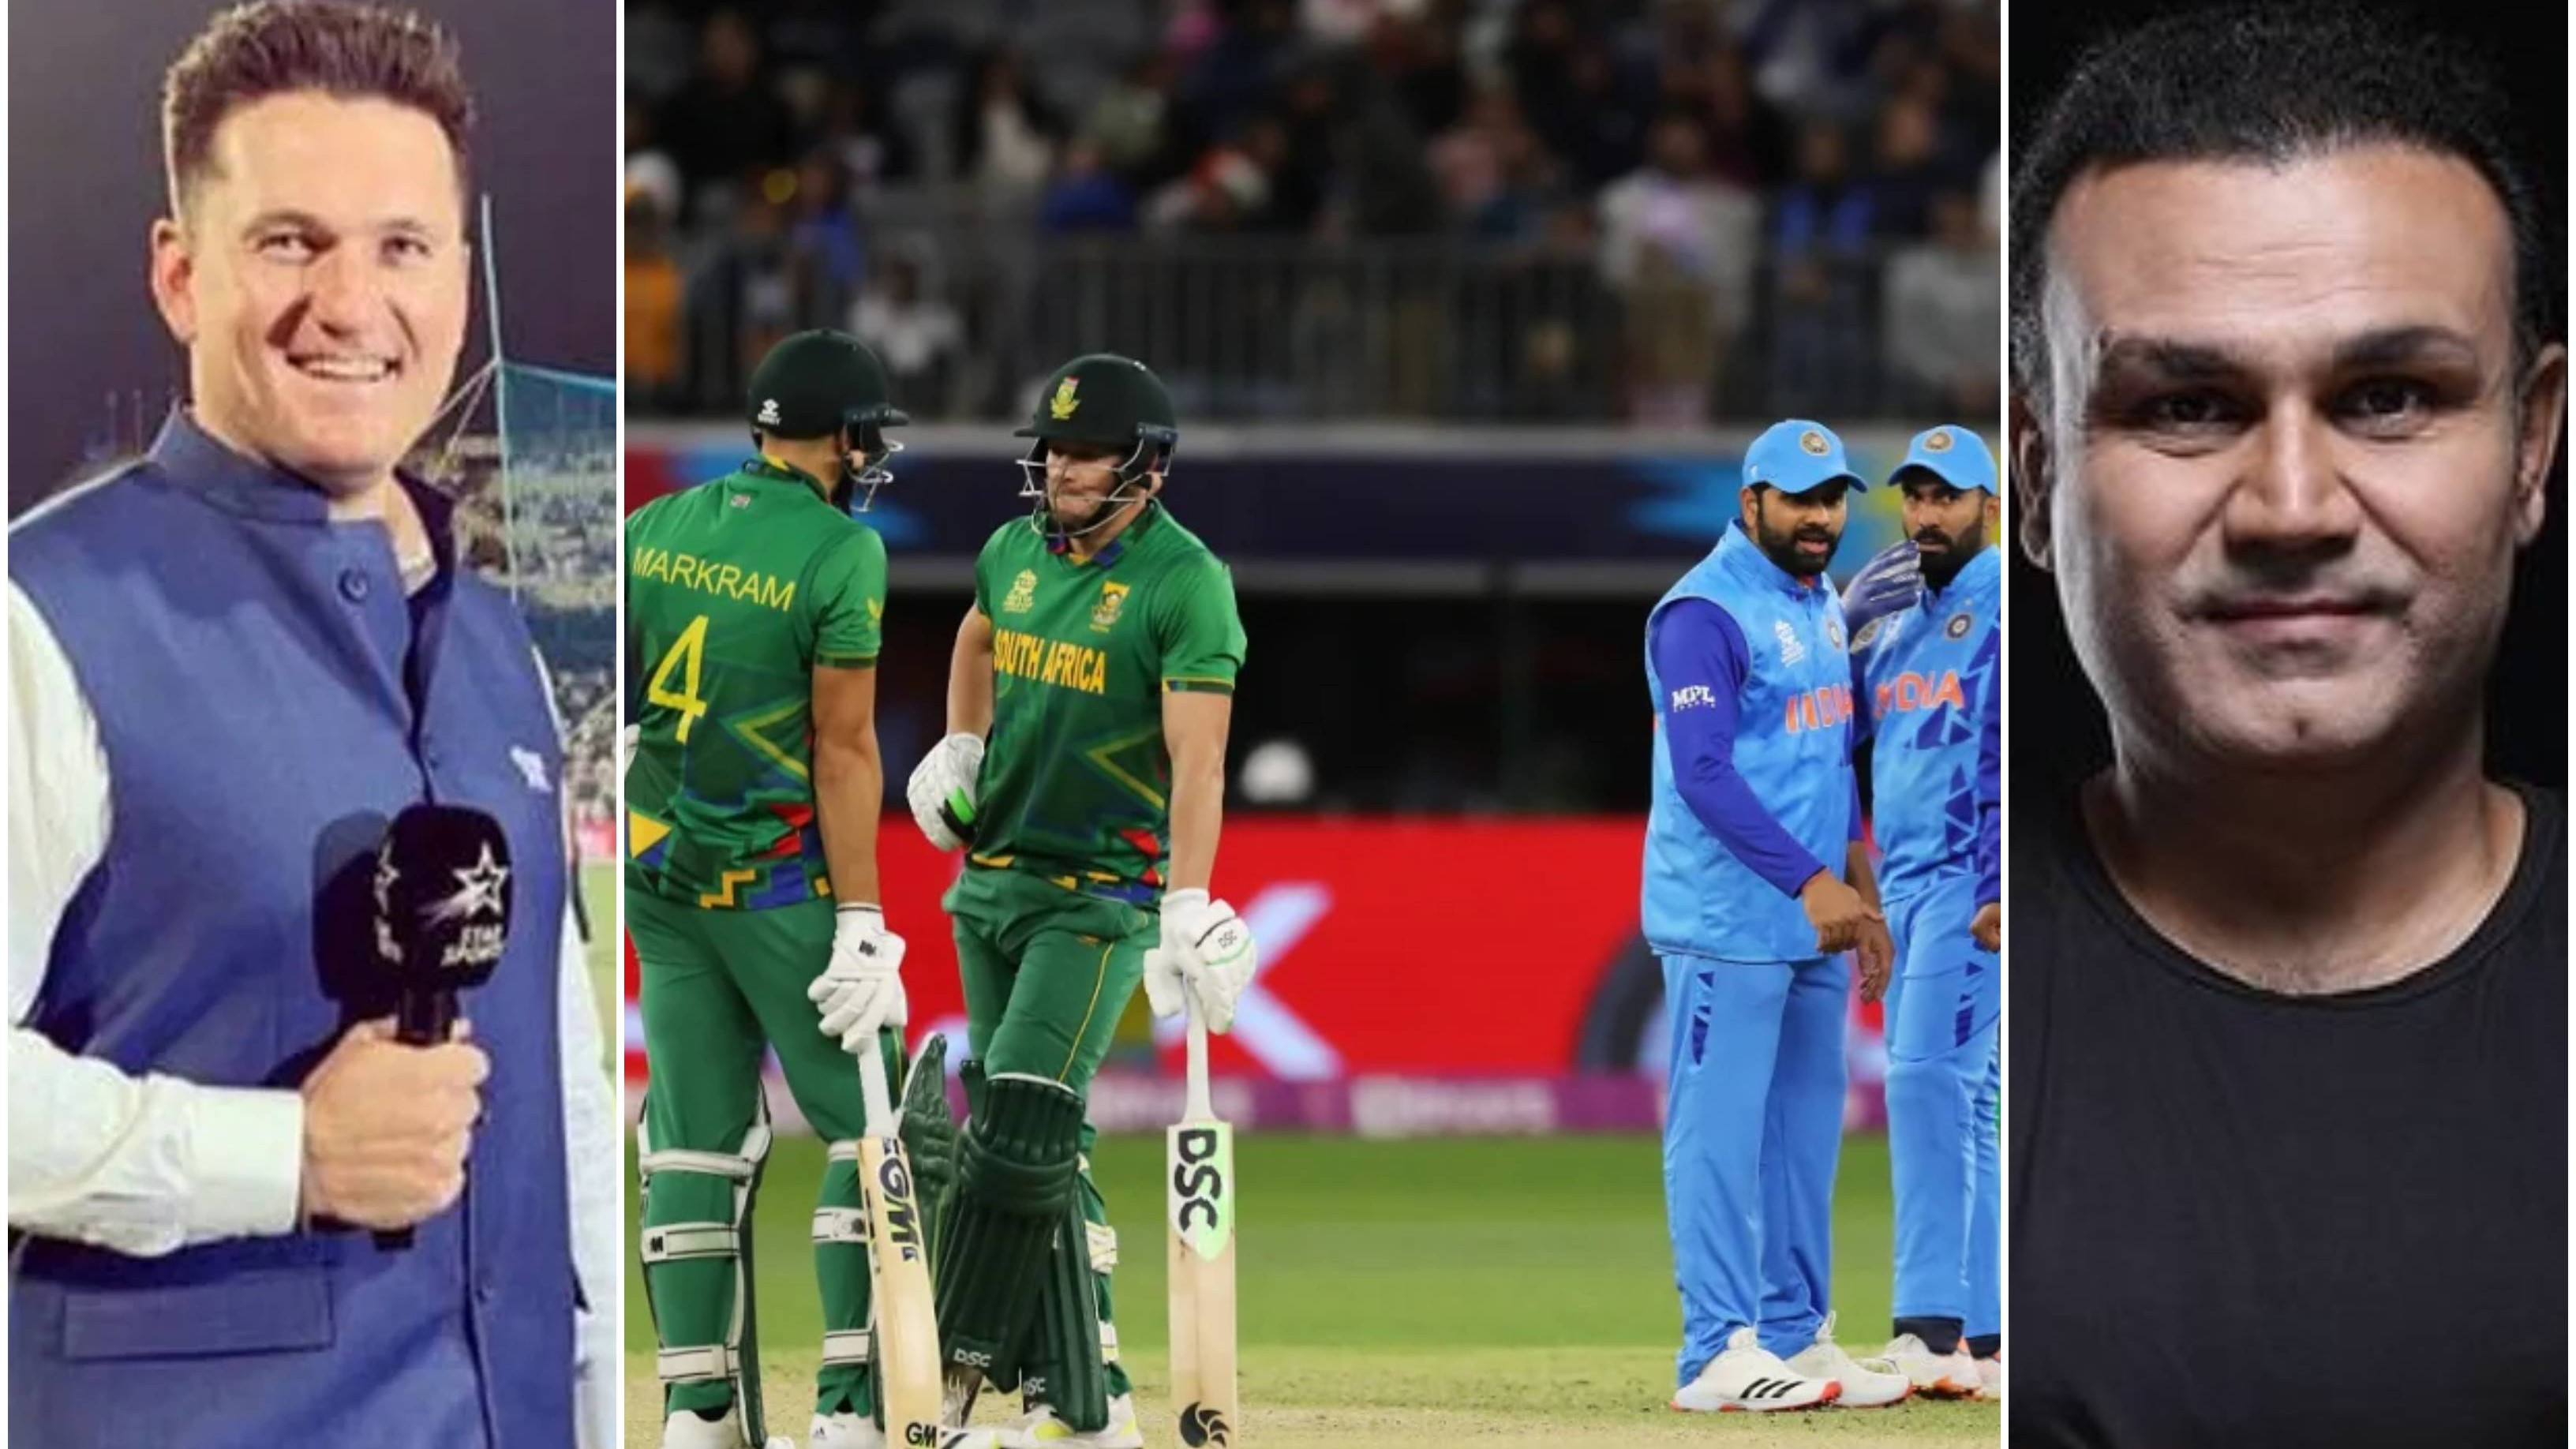 T20 World Cup 2022: Cricket fraternity reacts as Miller, Markram power South Africa to 5-wicket win over India